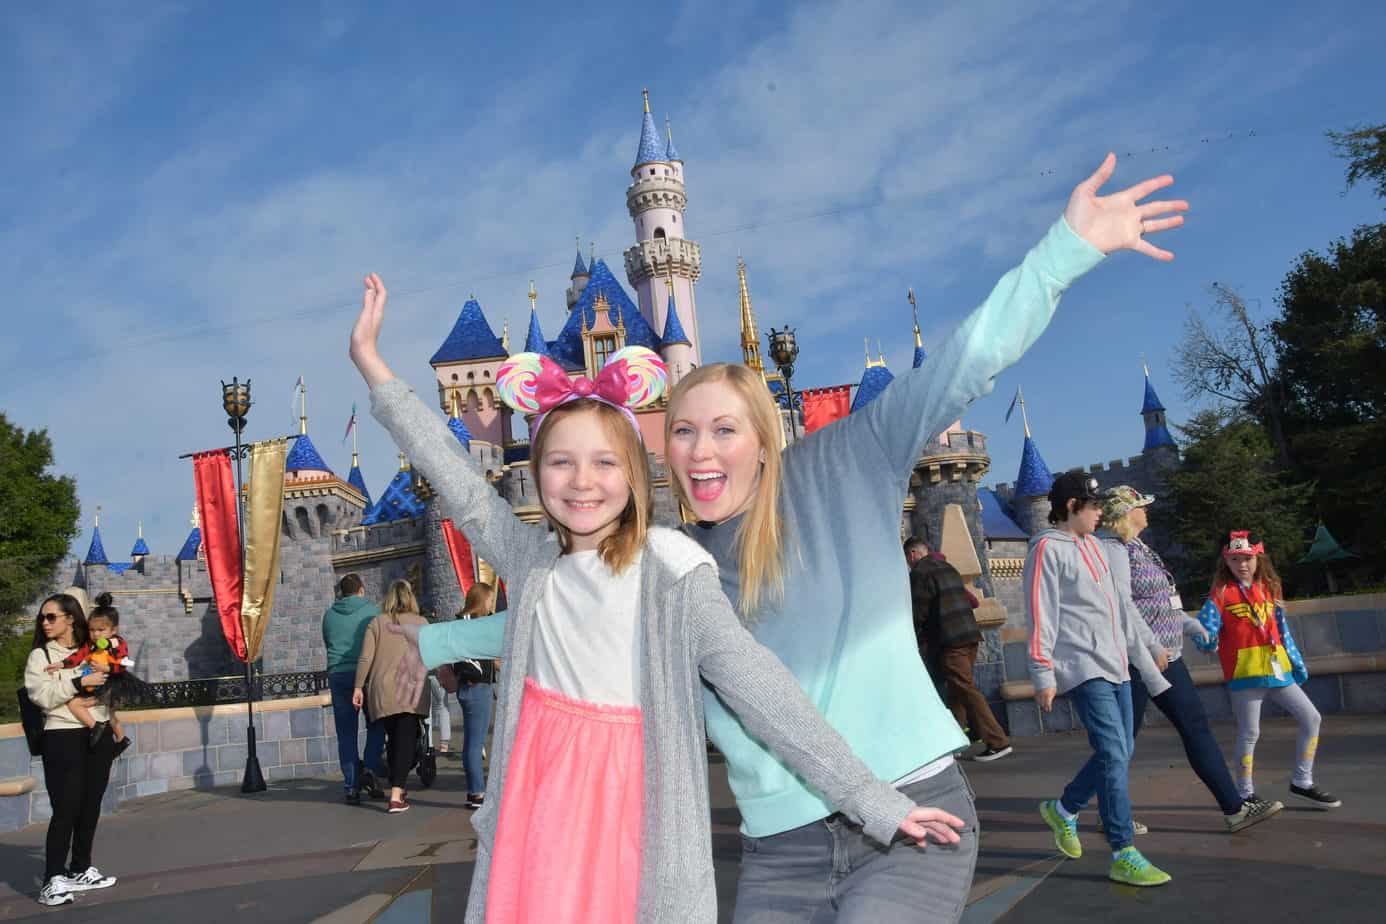 Mother's Day at Disneyland | The Happiest Blog on Earth